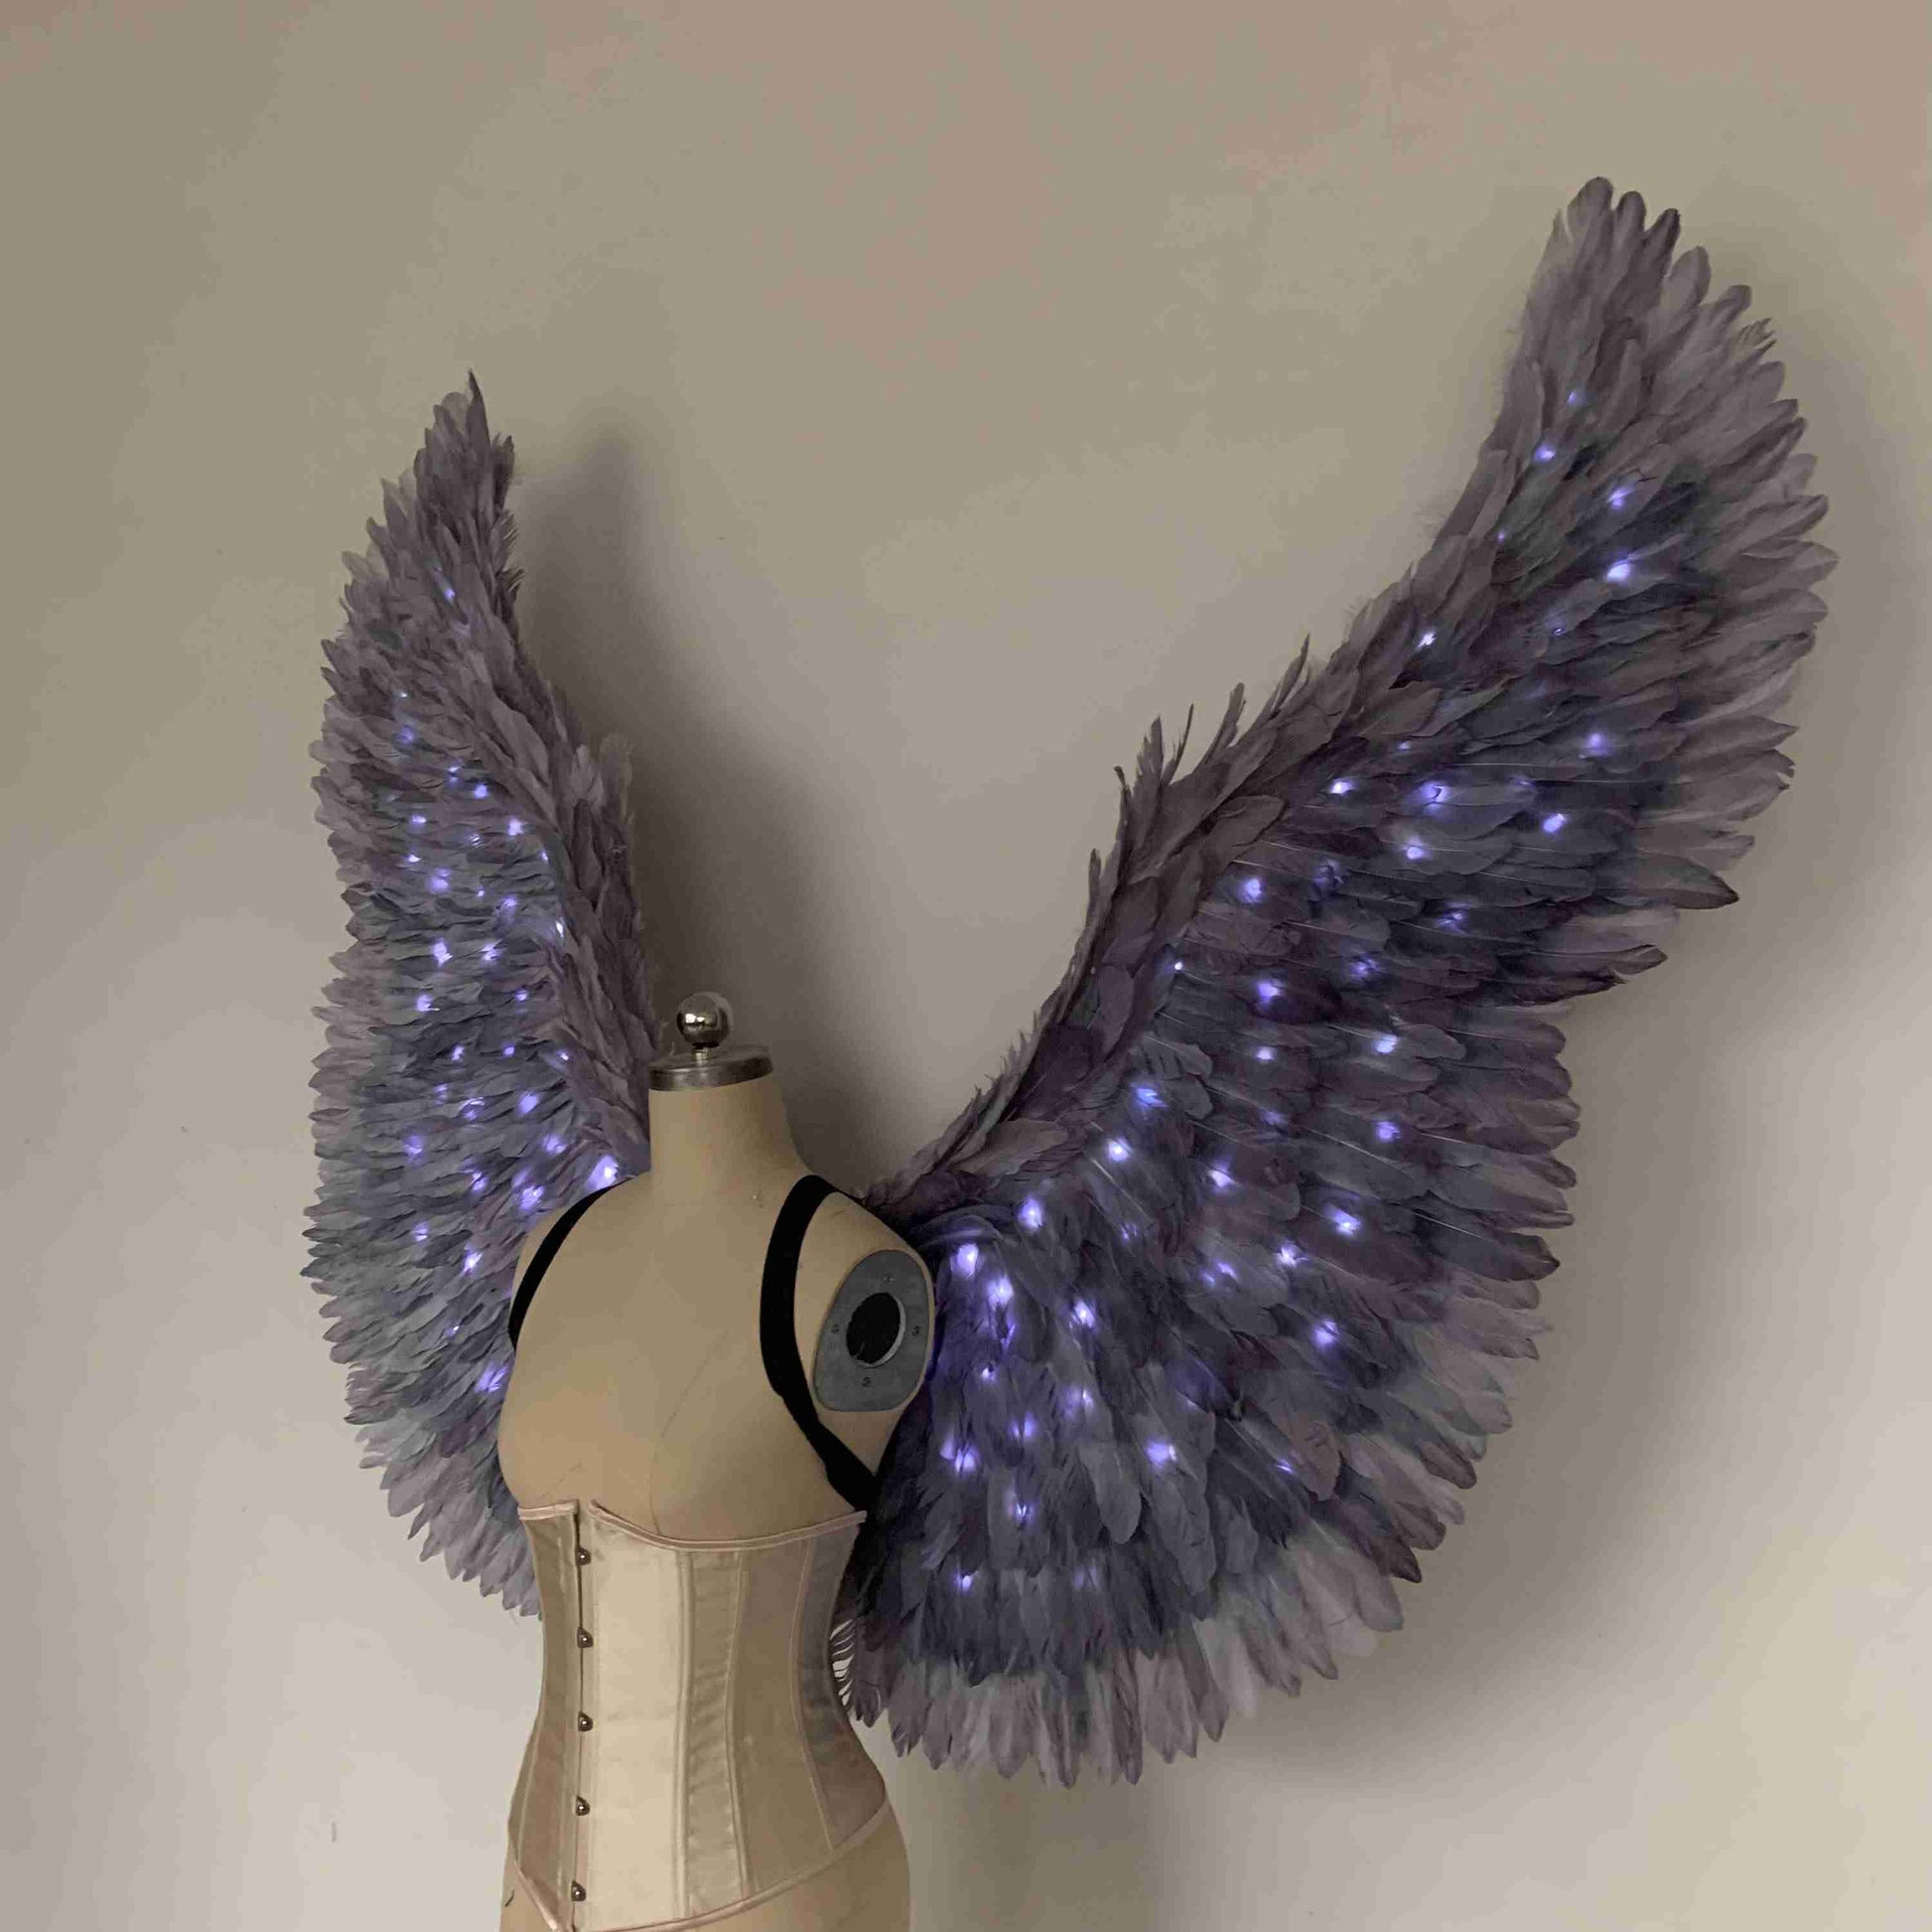 Our purple color angel wings from the left side. Made from goose feathers with LED lights inside. Wings for angel costume. Suitable for photoshoots.